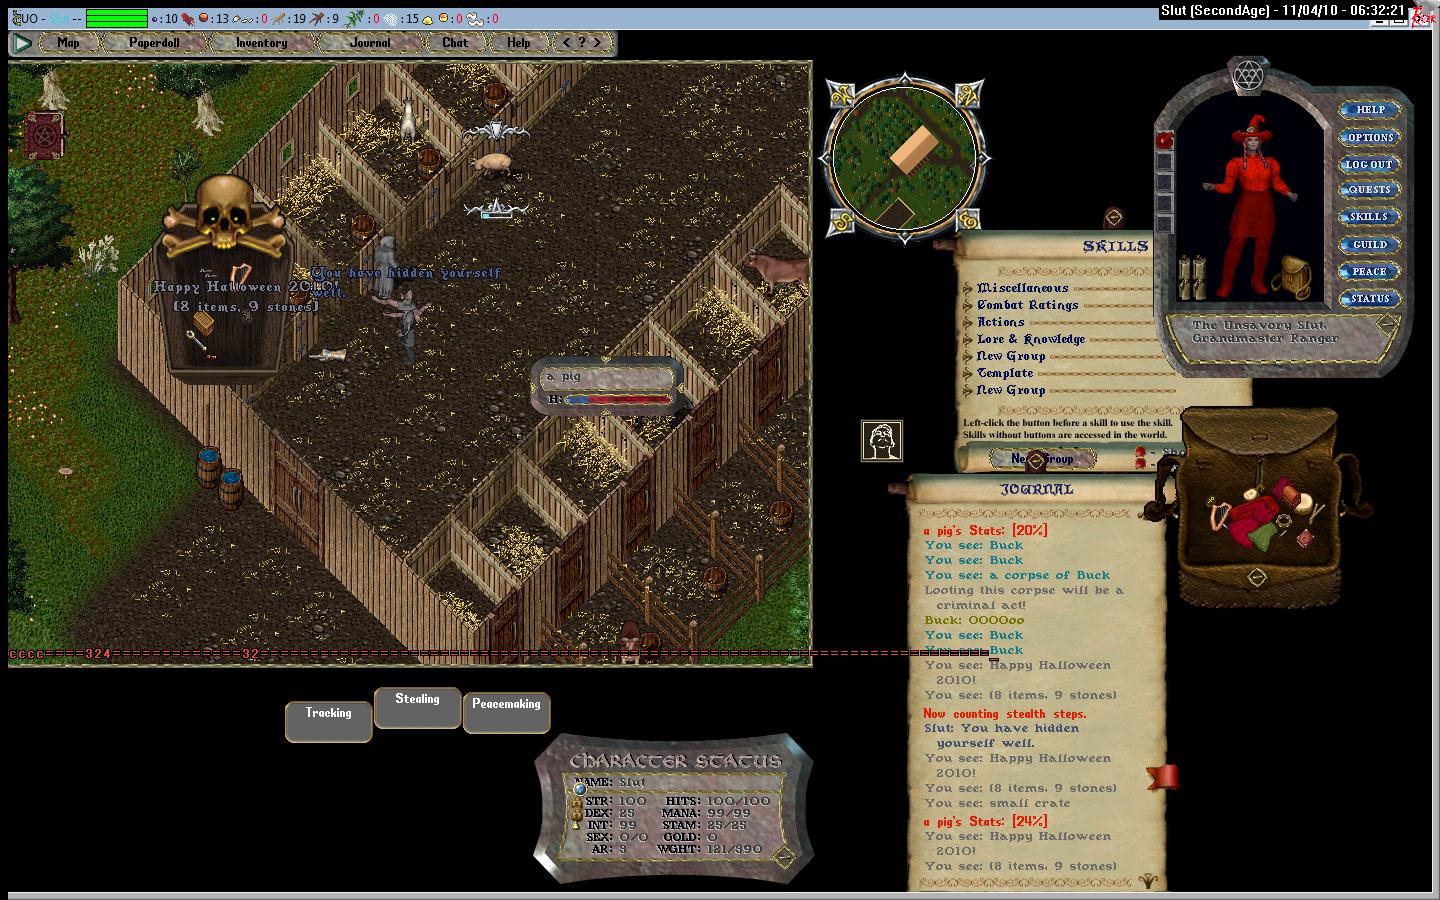 Pic Of the Day for Friday, November 5, 2010!
guy dies after of 30 min epic battle  pigs vs 'Buck' drops Halloween items thanks :P